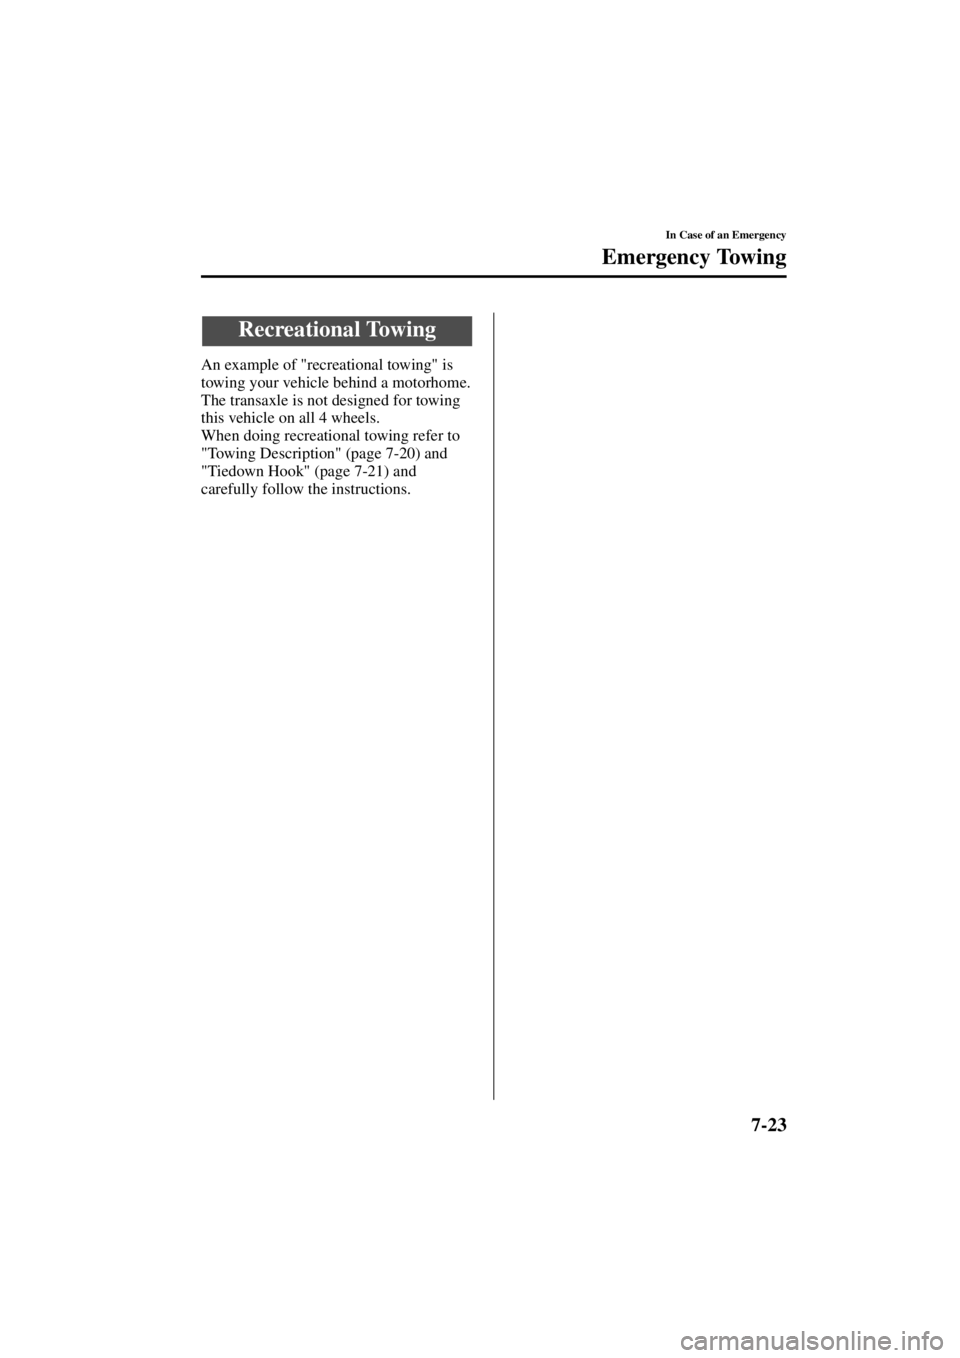 MAZDA MODEL 3 4-DOOR 2004  Owners Manual 7-23
In Case of an Emergency
Emergency Towing
Form No. 8S18-EA-03I
An example of "recreational towing" is 
towing your vehicle behind a motorhome.
The transaxle is not designed for towing 
this vehicl